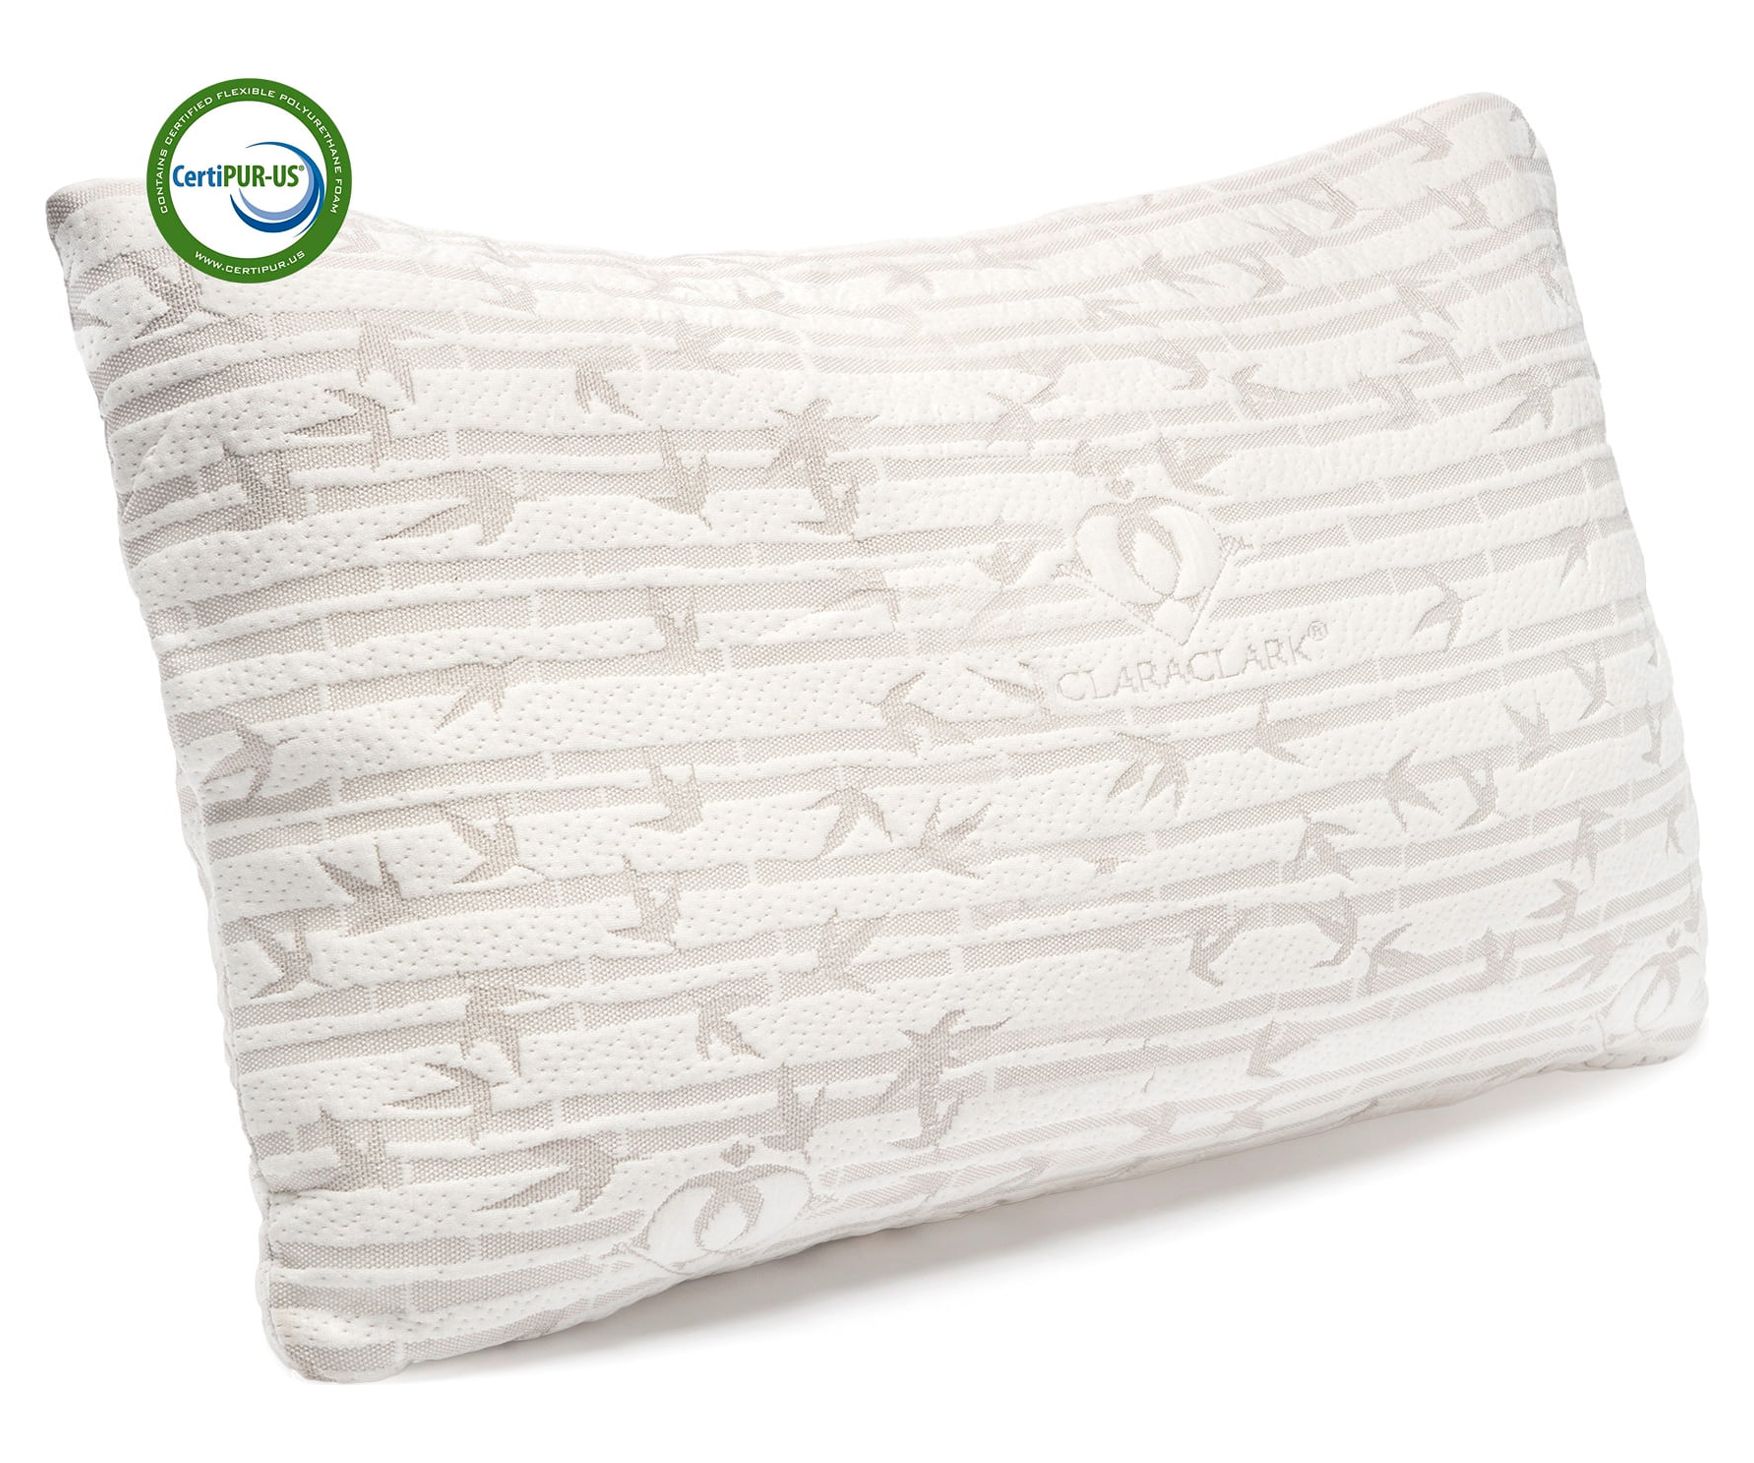 Hearth & Harbor Bed Pillow, Bamboo Pillows for Bed, Queen Size Pillows - image 1 of 8